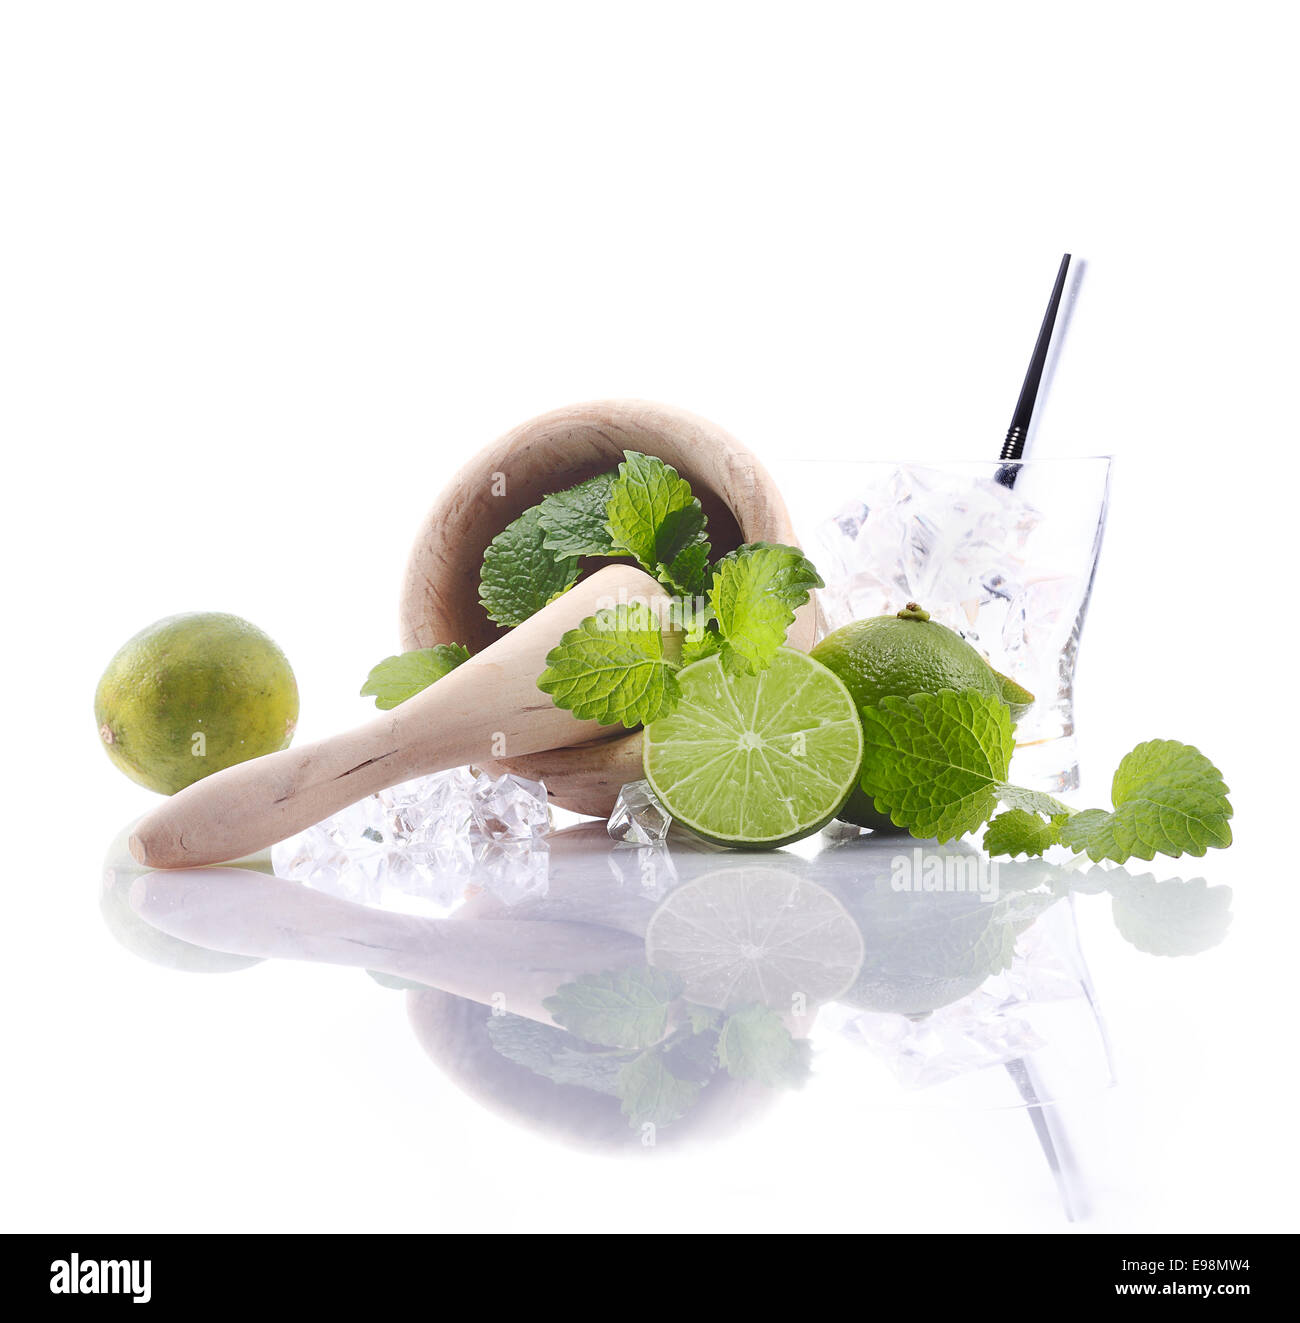 Caipirinha Ingredients with mortar and pestle and fresh lime. Aside an empty glass with ice cubes. For Drinkable Concepts Stock Photo